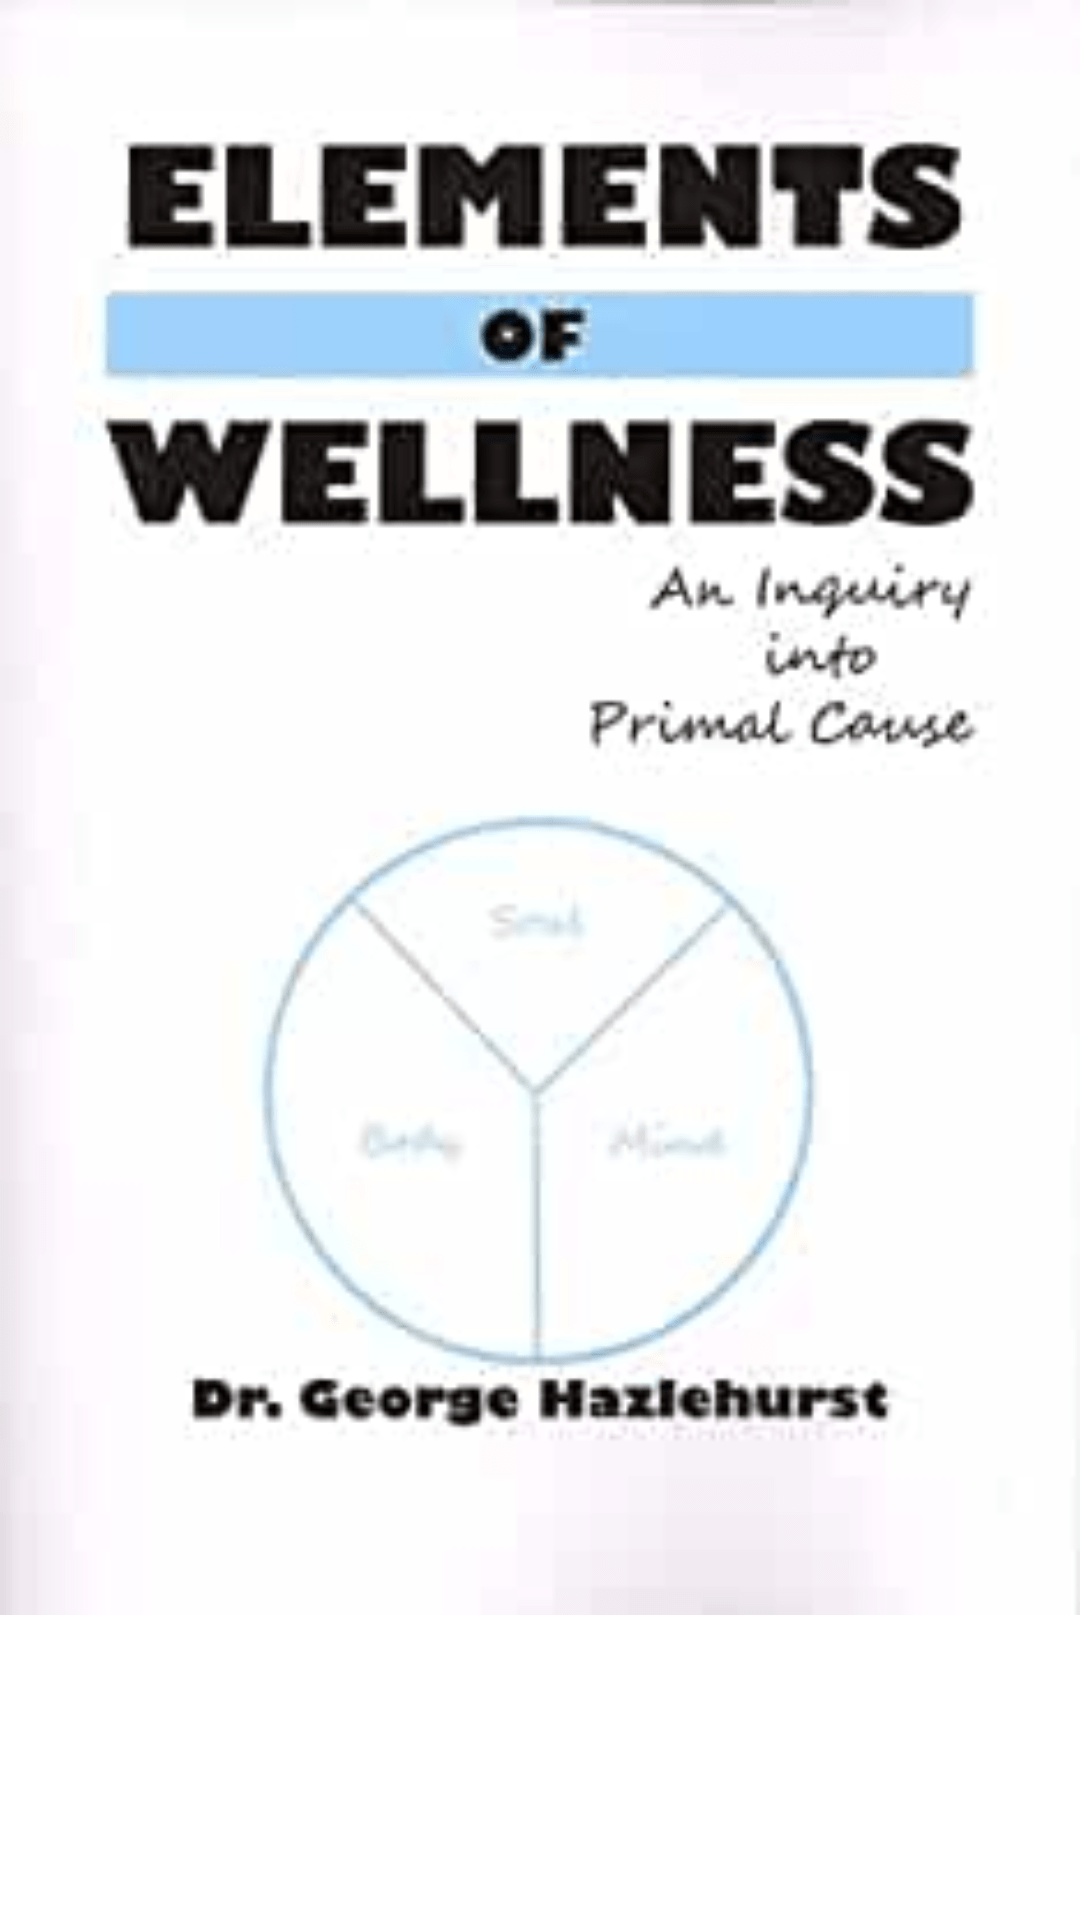 Elements of Wellness: An Inquiry Into Primal Cause